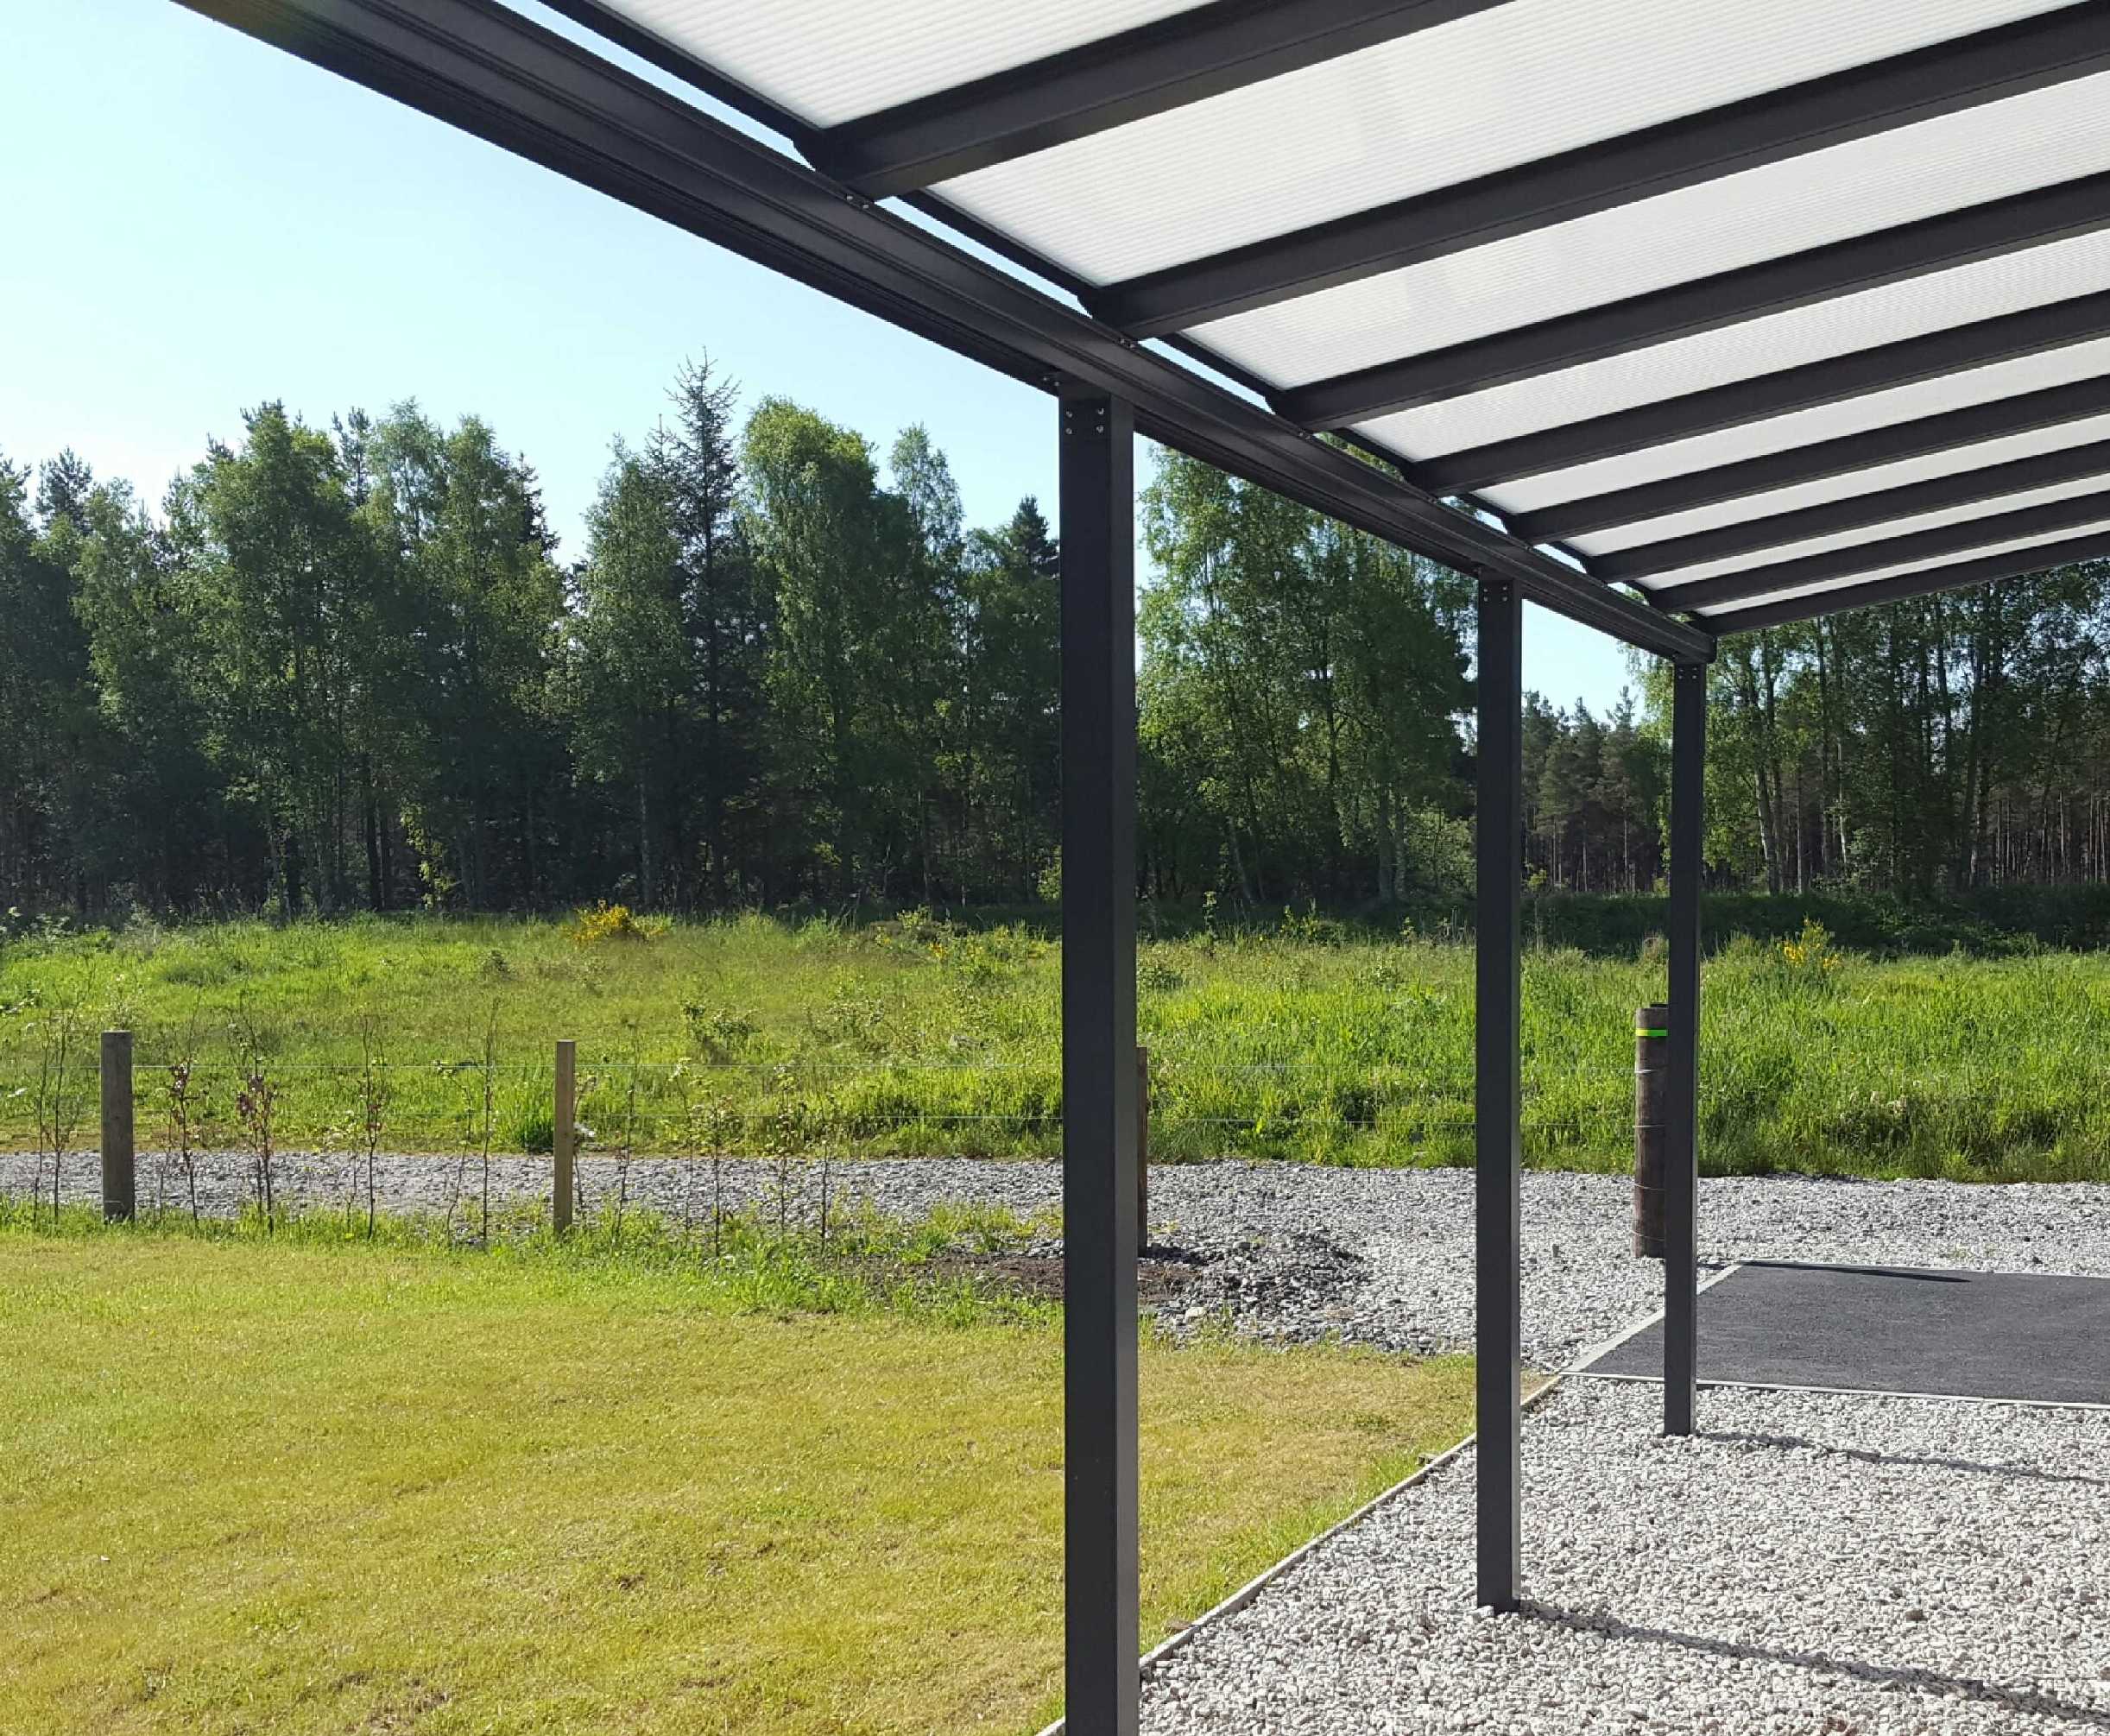 Omega Smart Lean-To Canopy, Anthracite Grey, UNGLAZED for 6mm Glazing - 4.9m (W) x 1.5m (P), (3) Supporting Posts